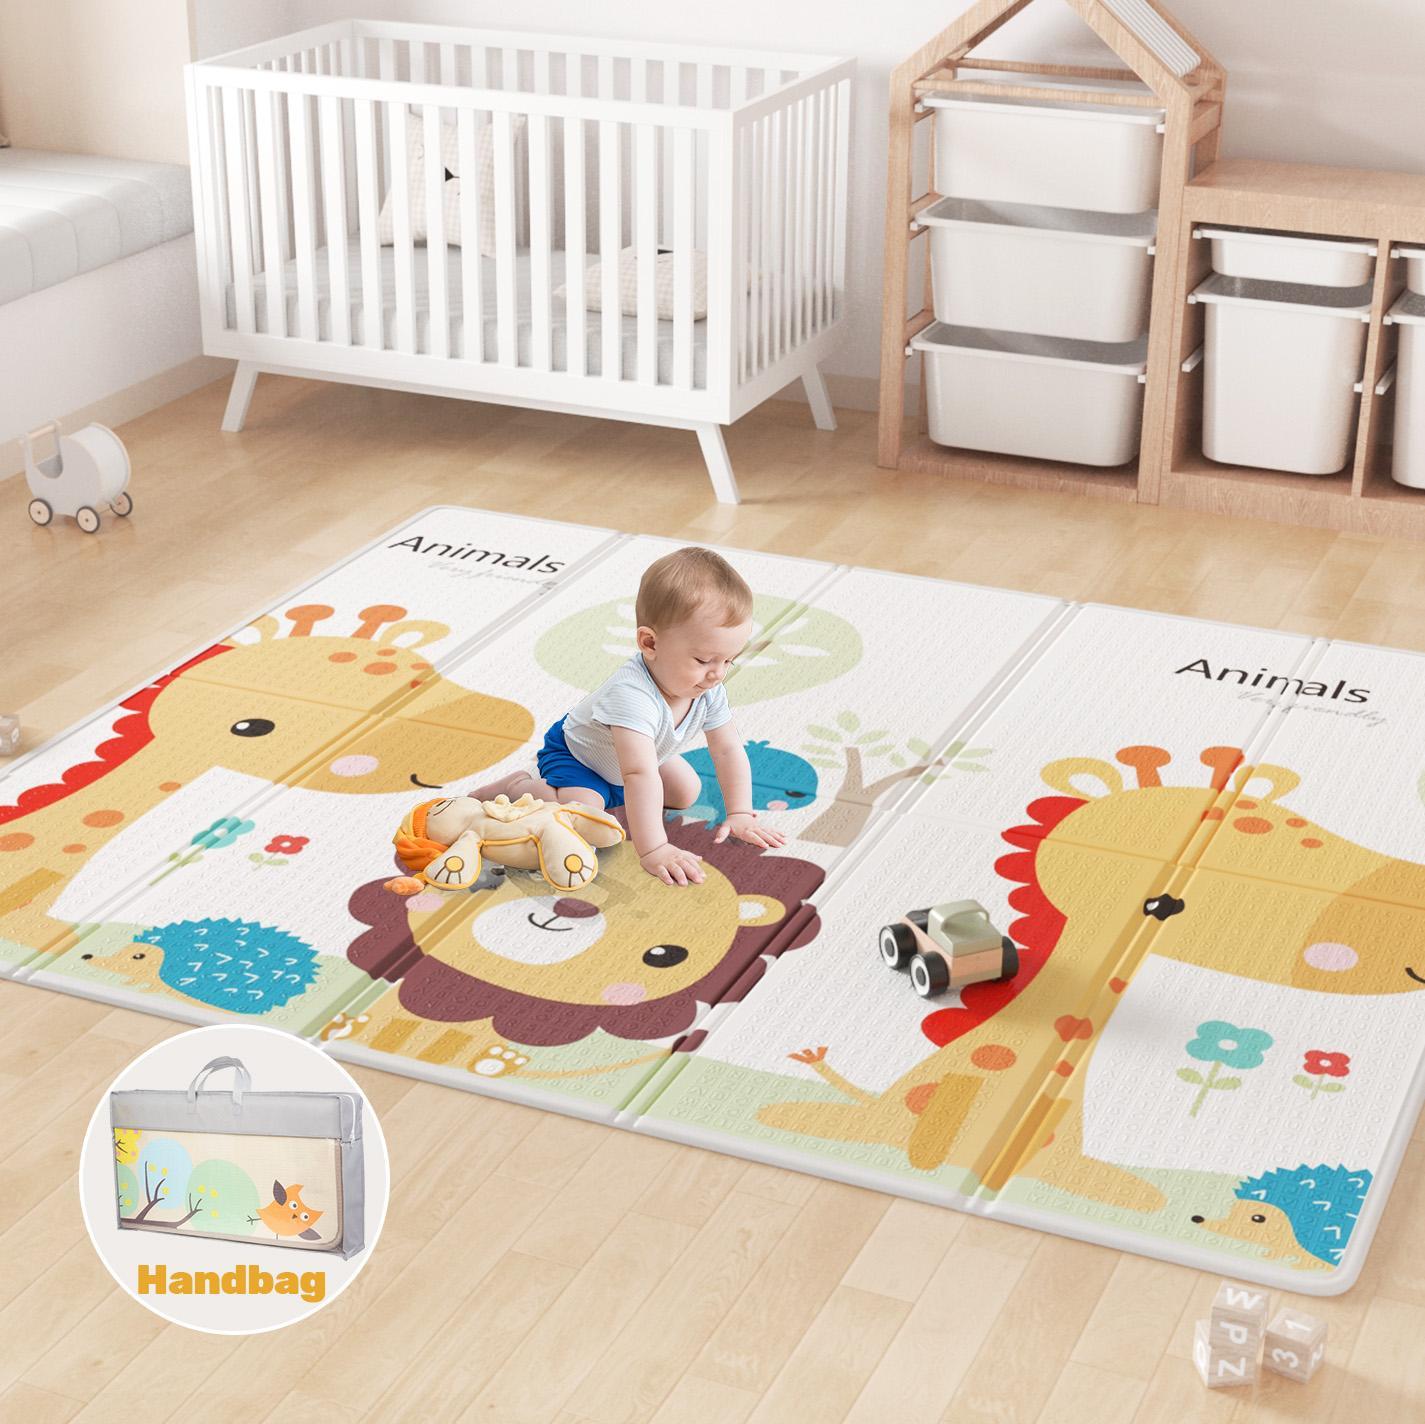 Advwin Foldable Baby Play Mat 180*200*1cm Extra Large Waterproof Activity Playmats Foam Floor Crawling Mat with Travel Bag